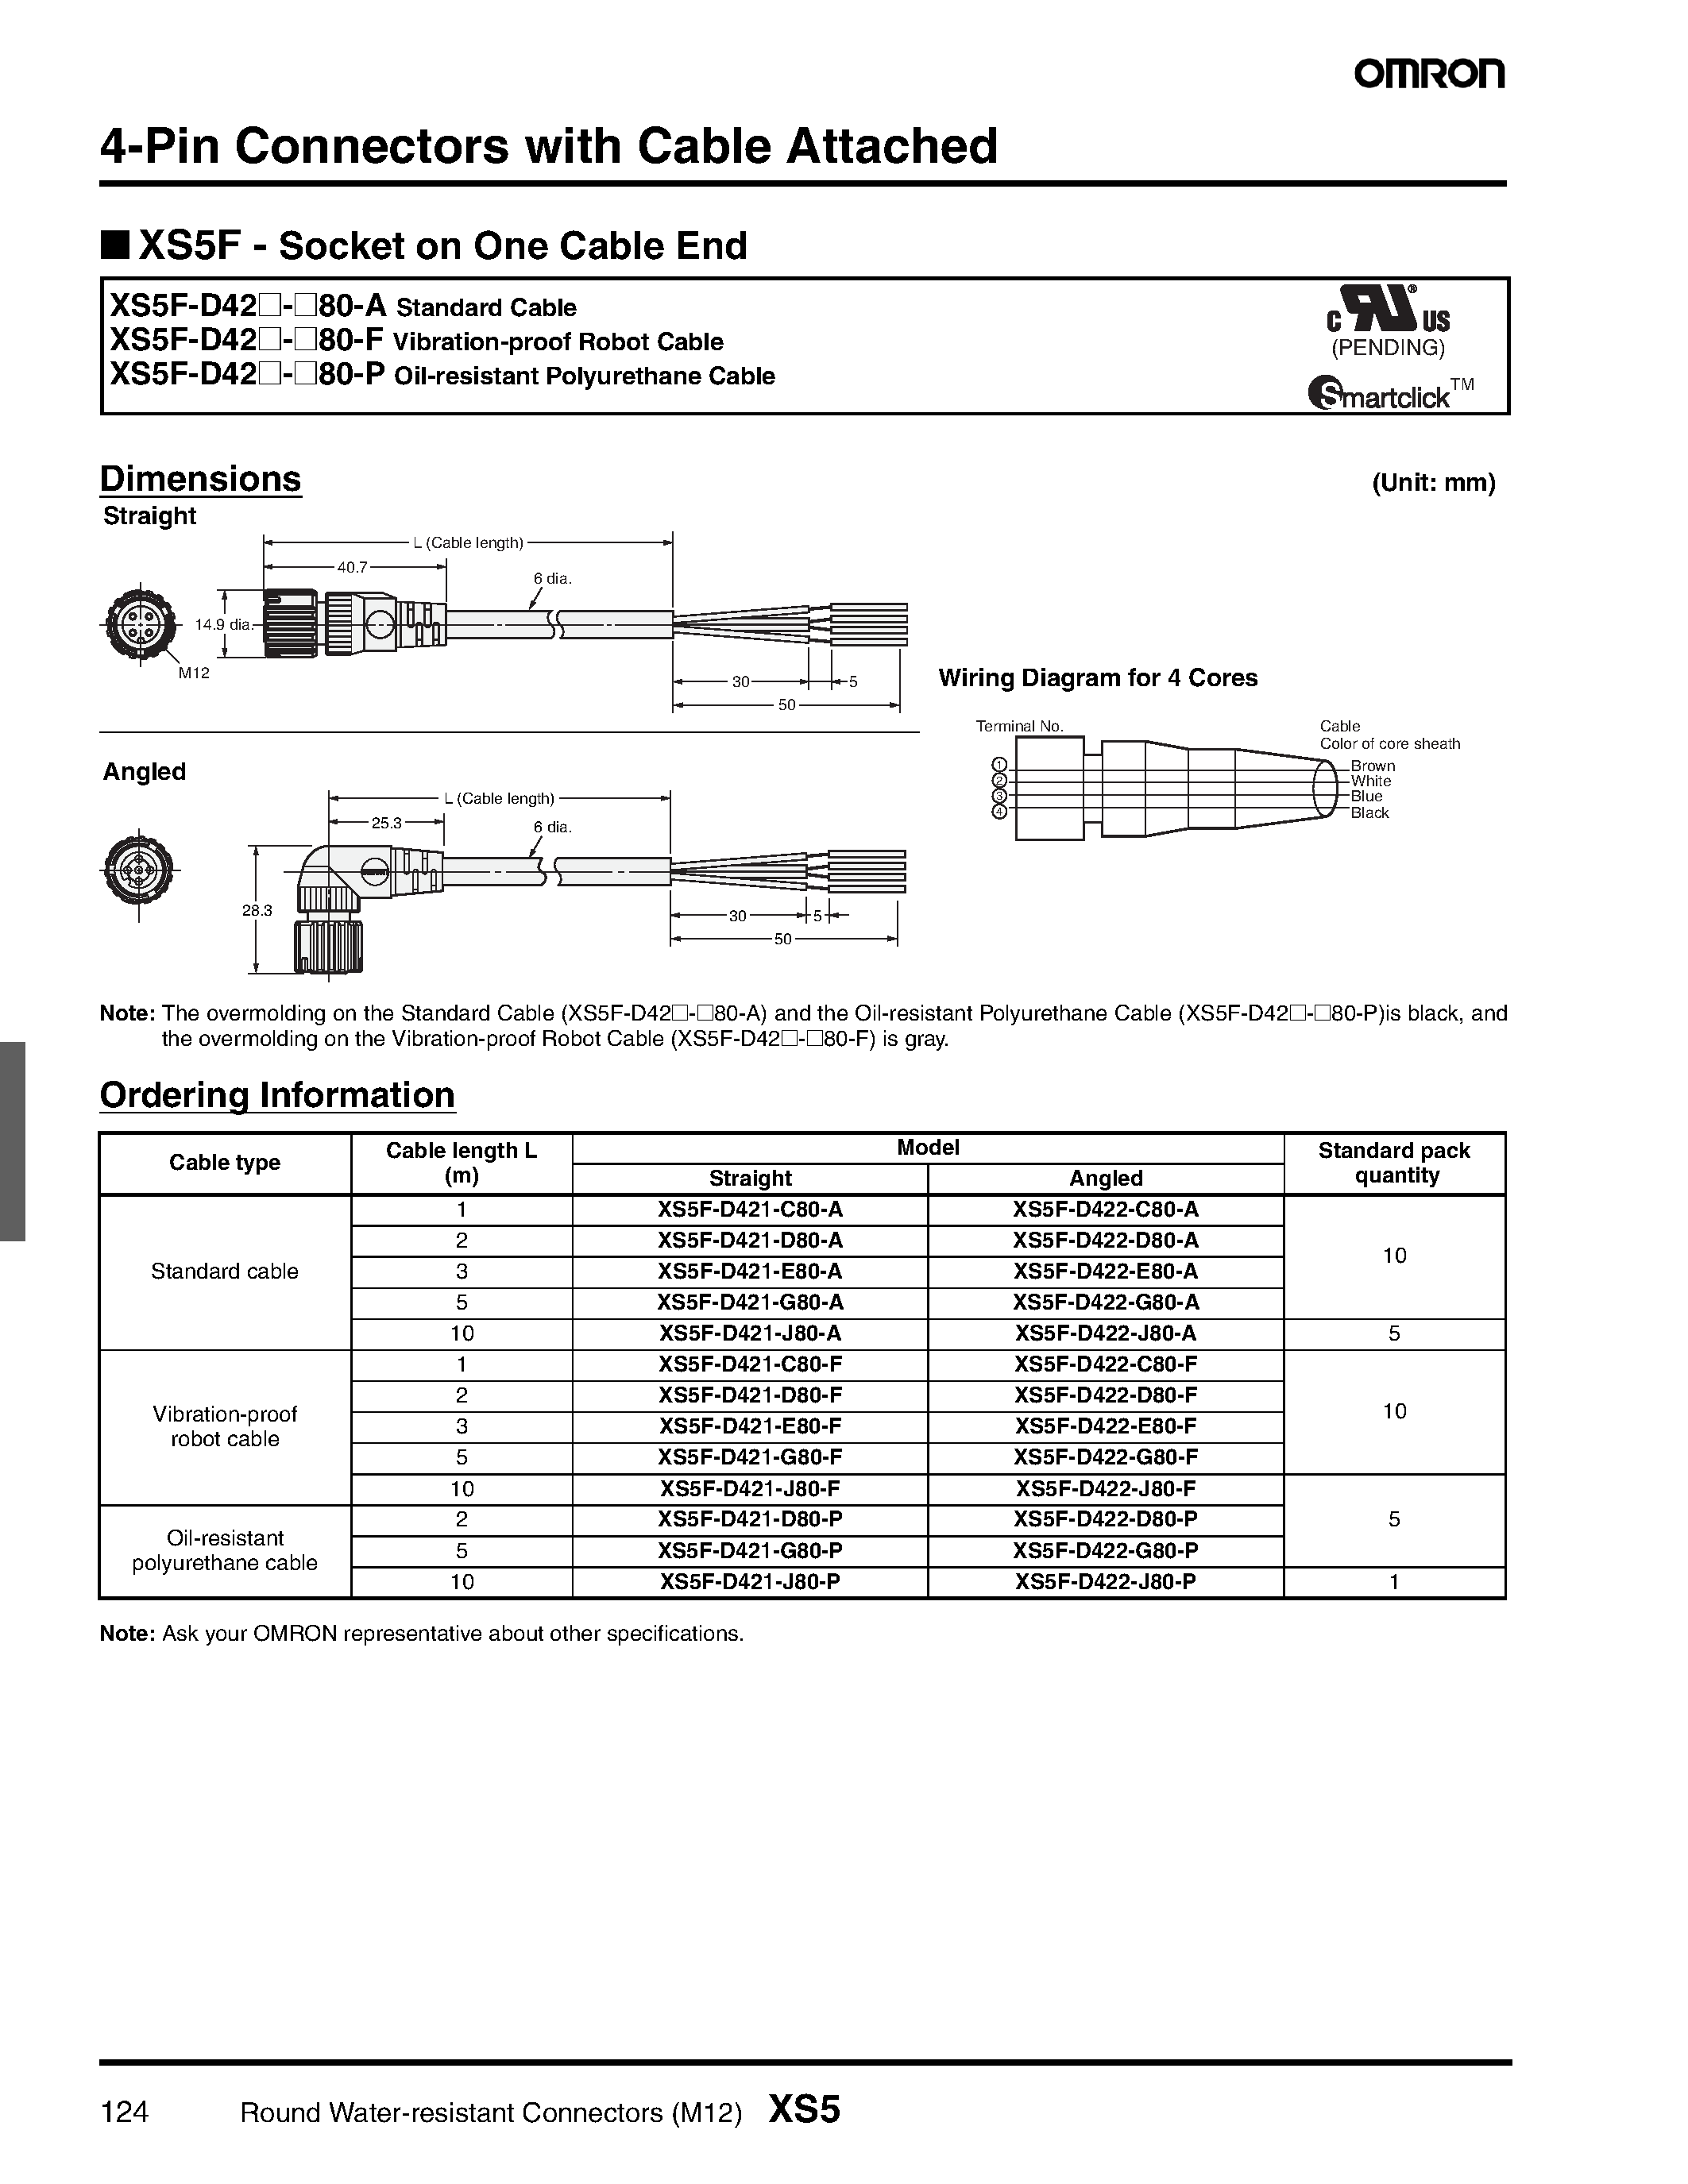 Datasheet XS5 - Round Water-resistant Connectors page 2